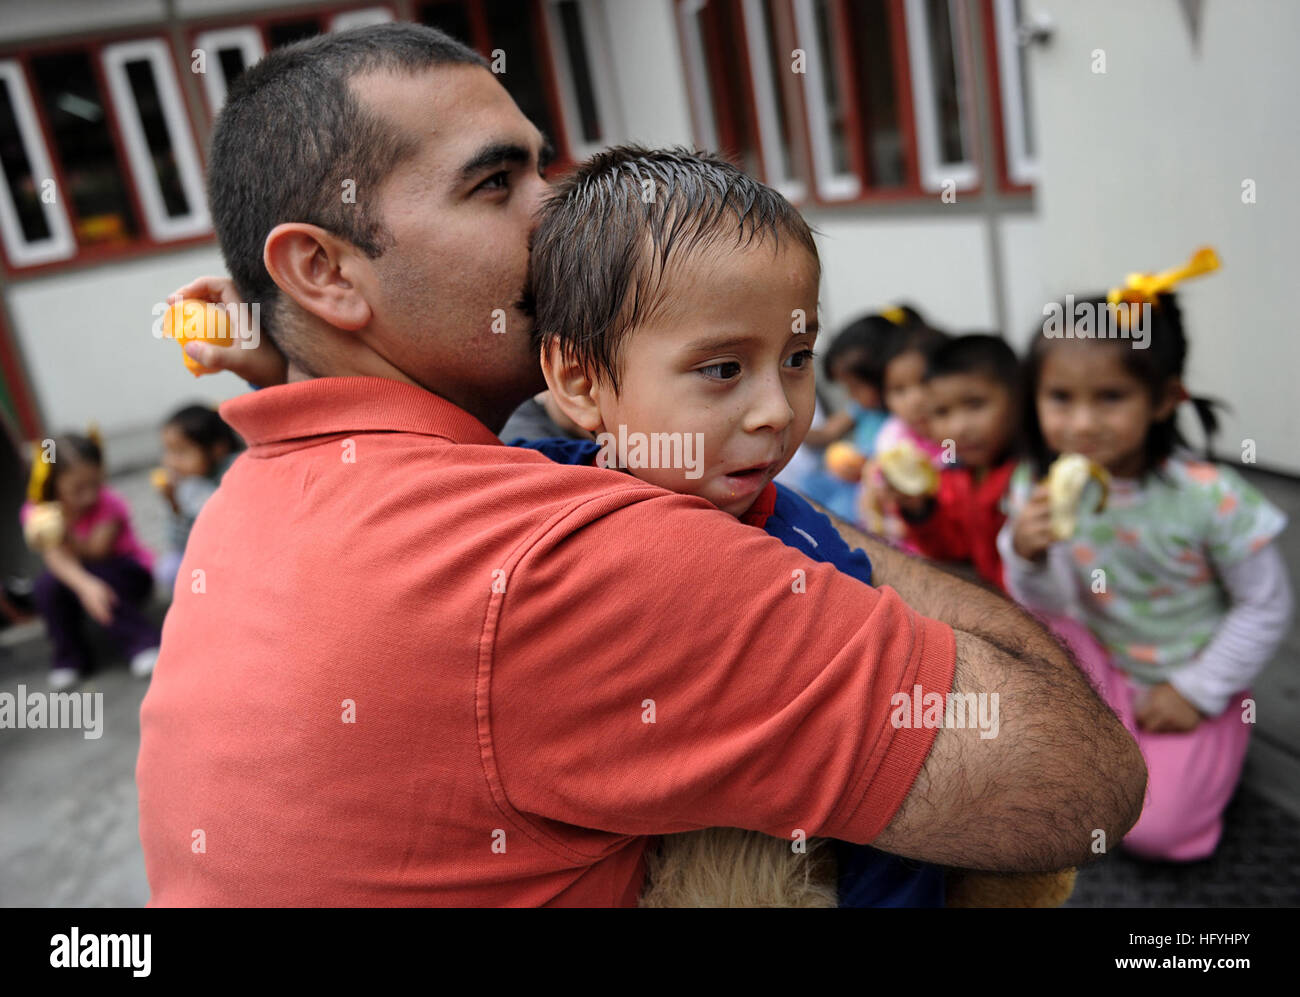 101210-N-2984R-635 EL AGUSTINO, Peru (Dec. 10, 2010) Electronics Technician 1st Class Joel Eyzaguirre, a member of Maritime Civil Affairs and Security Training Command (MCAST), hugs his godson after an arranged meeting at the Johannes Gutenberg School. Eyzaguirre is a former student at the school and is in Peru in support of Southern Partnership Station (SPS) 2011. SPS-2011 is an annual deployment of U.S. ships to the U.S. Southern Command's area of responsibility in the Caribbean and Latin America. (U.S. Navy photo by Mass Communication Specialist 2nd Class Ricardo J. Reyes/Released) US Navy  Stock Photo